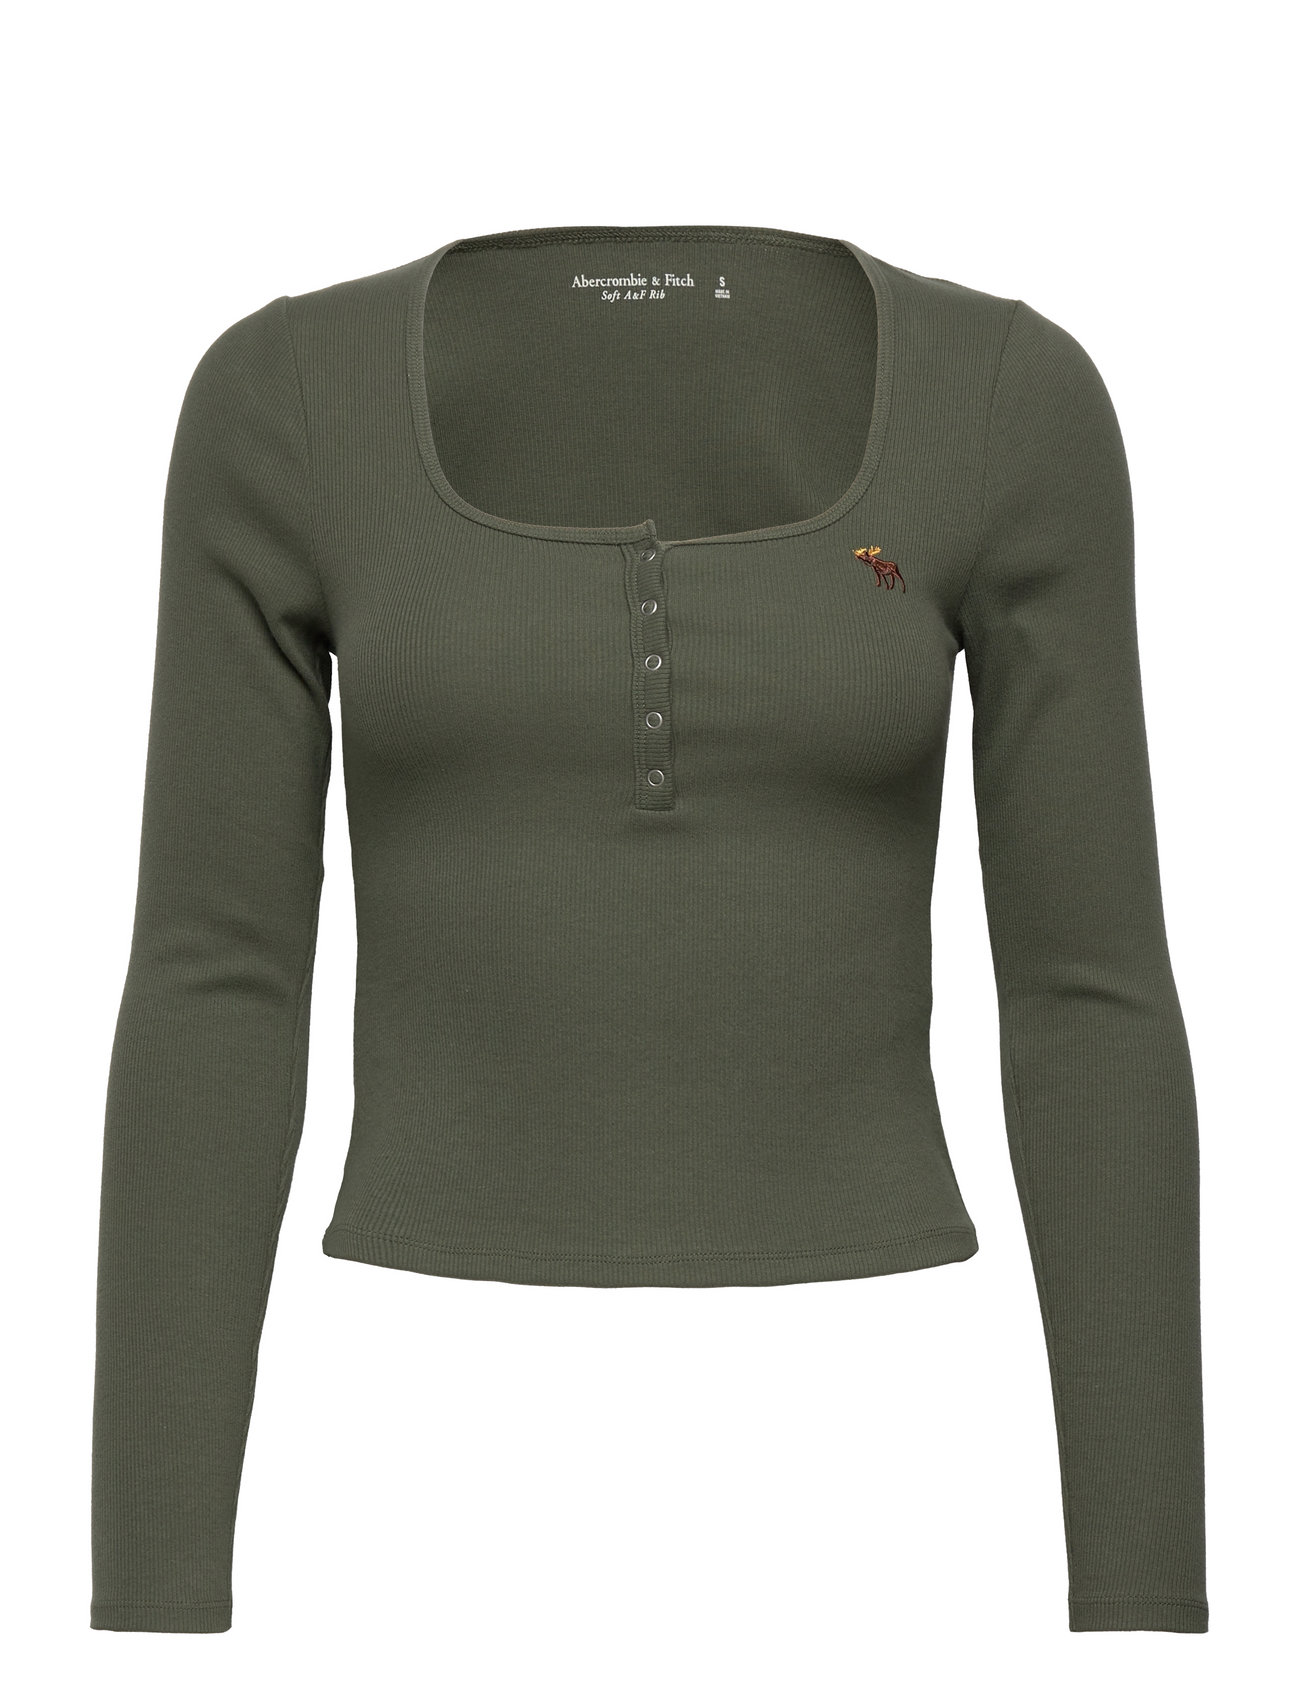 Anf Womens Knits T-shirts & Tops Long-sleeved Khaki Green Abercrombie & Fitch